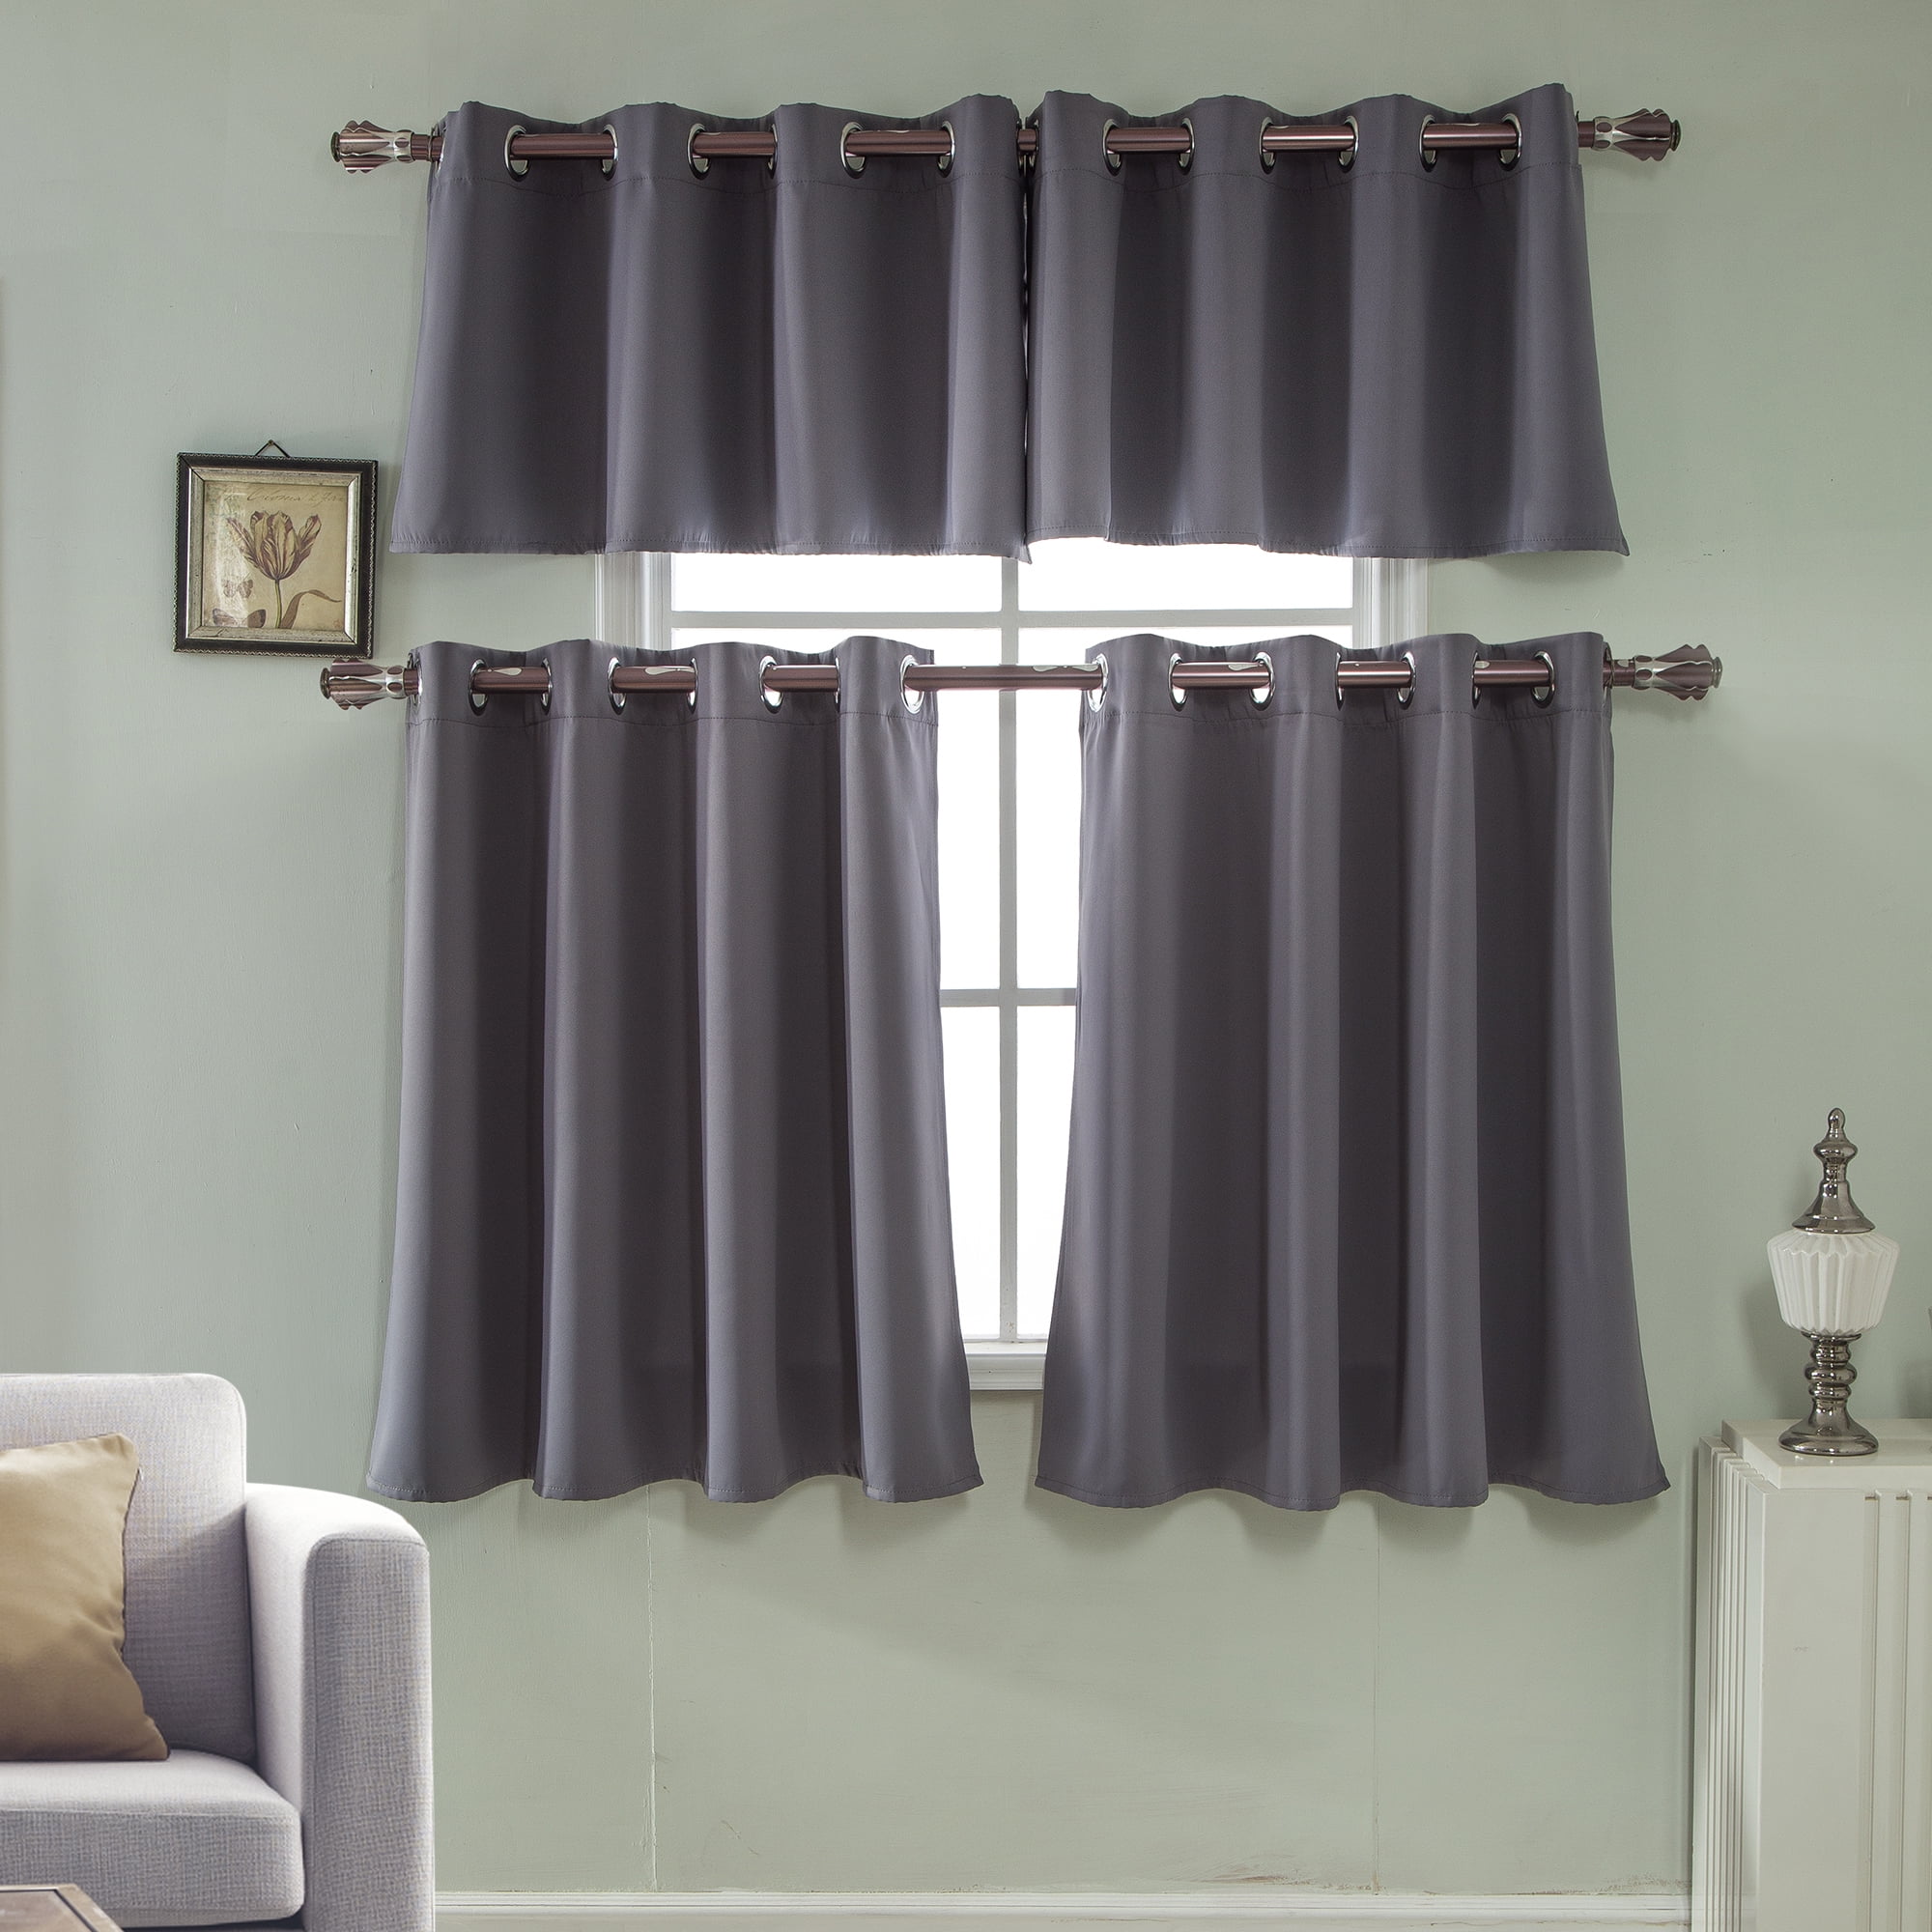 Blackout Short Curtains Kitchen Living Room Bedroom Small Window Curtain Drape 